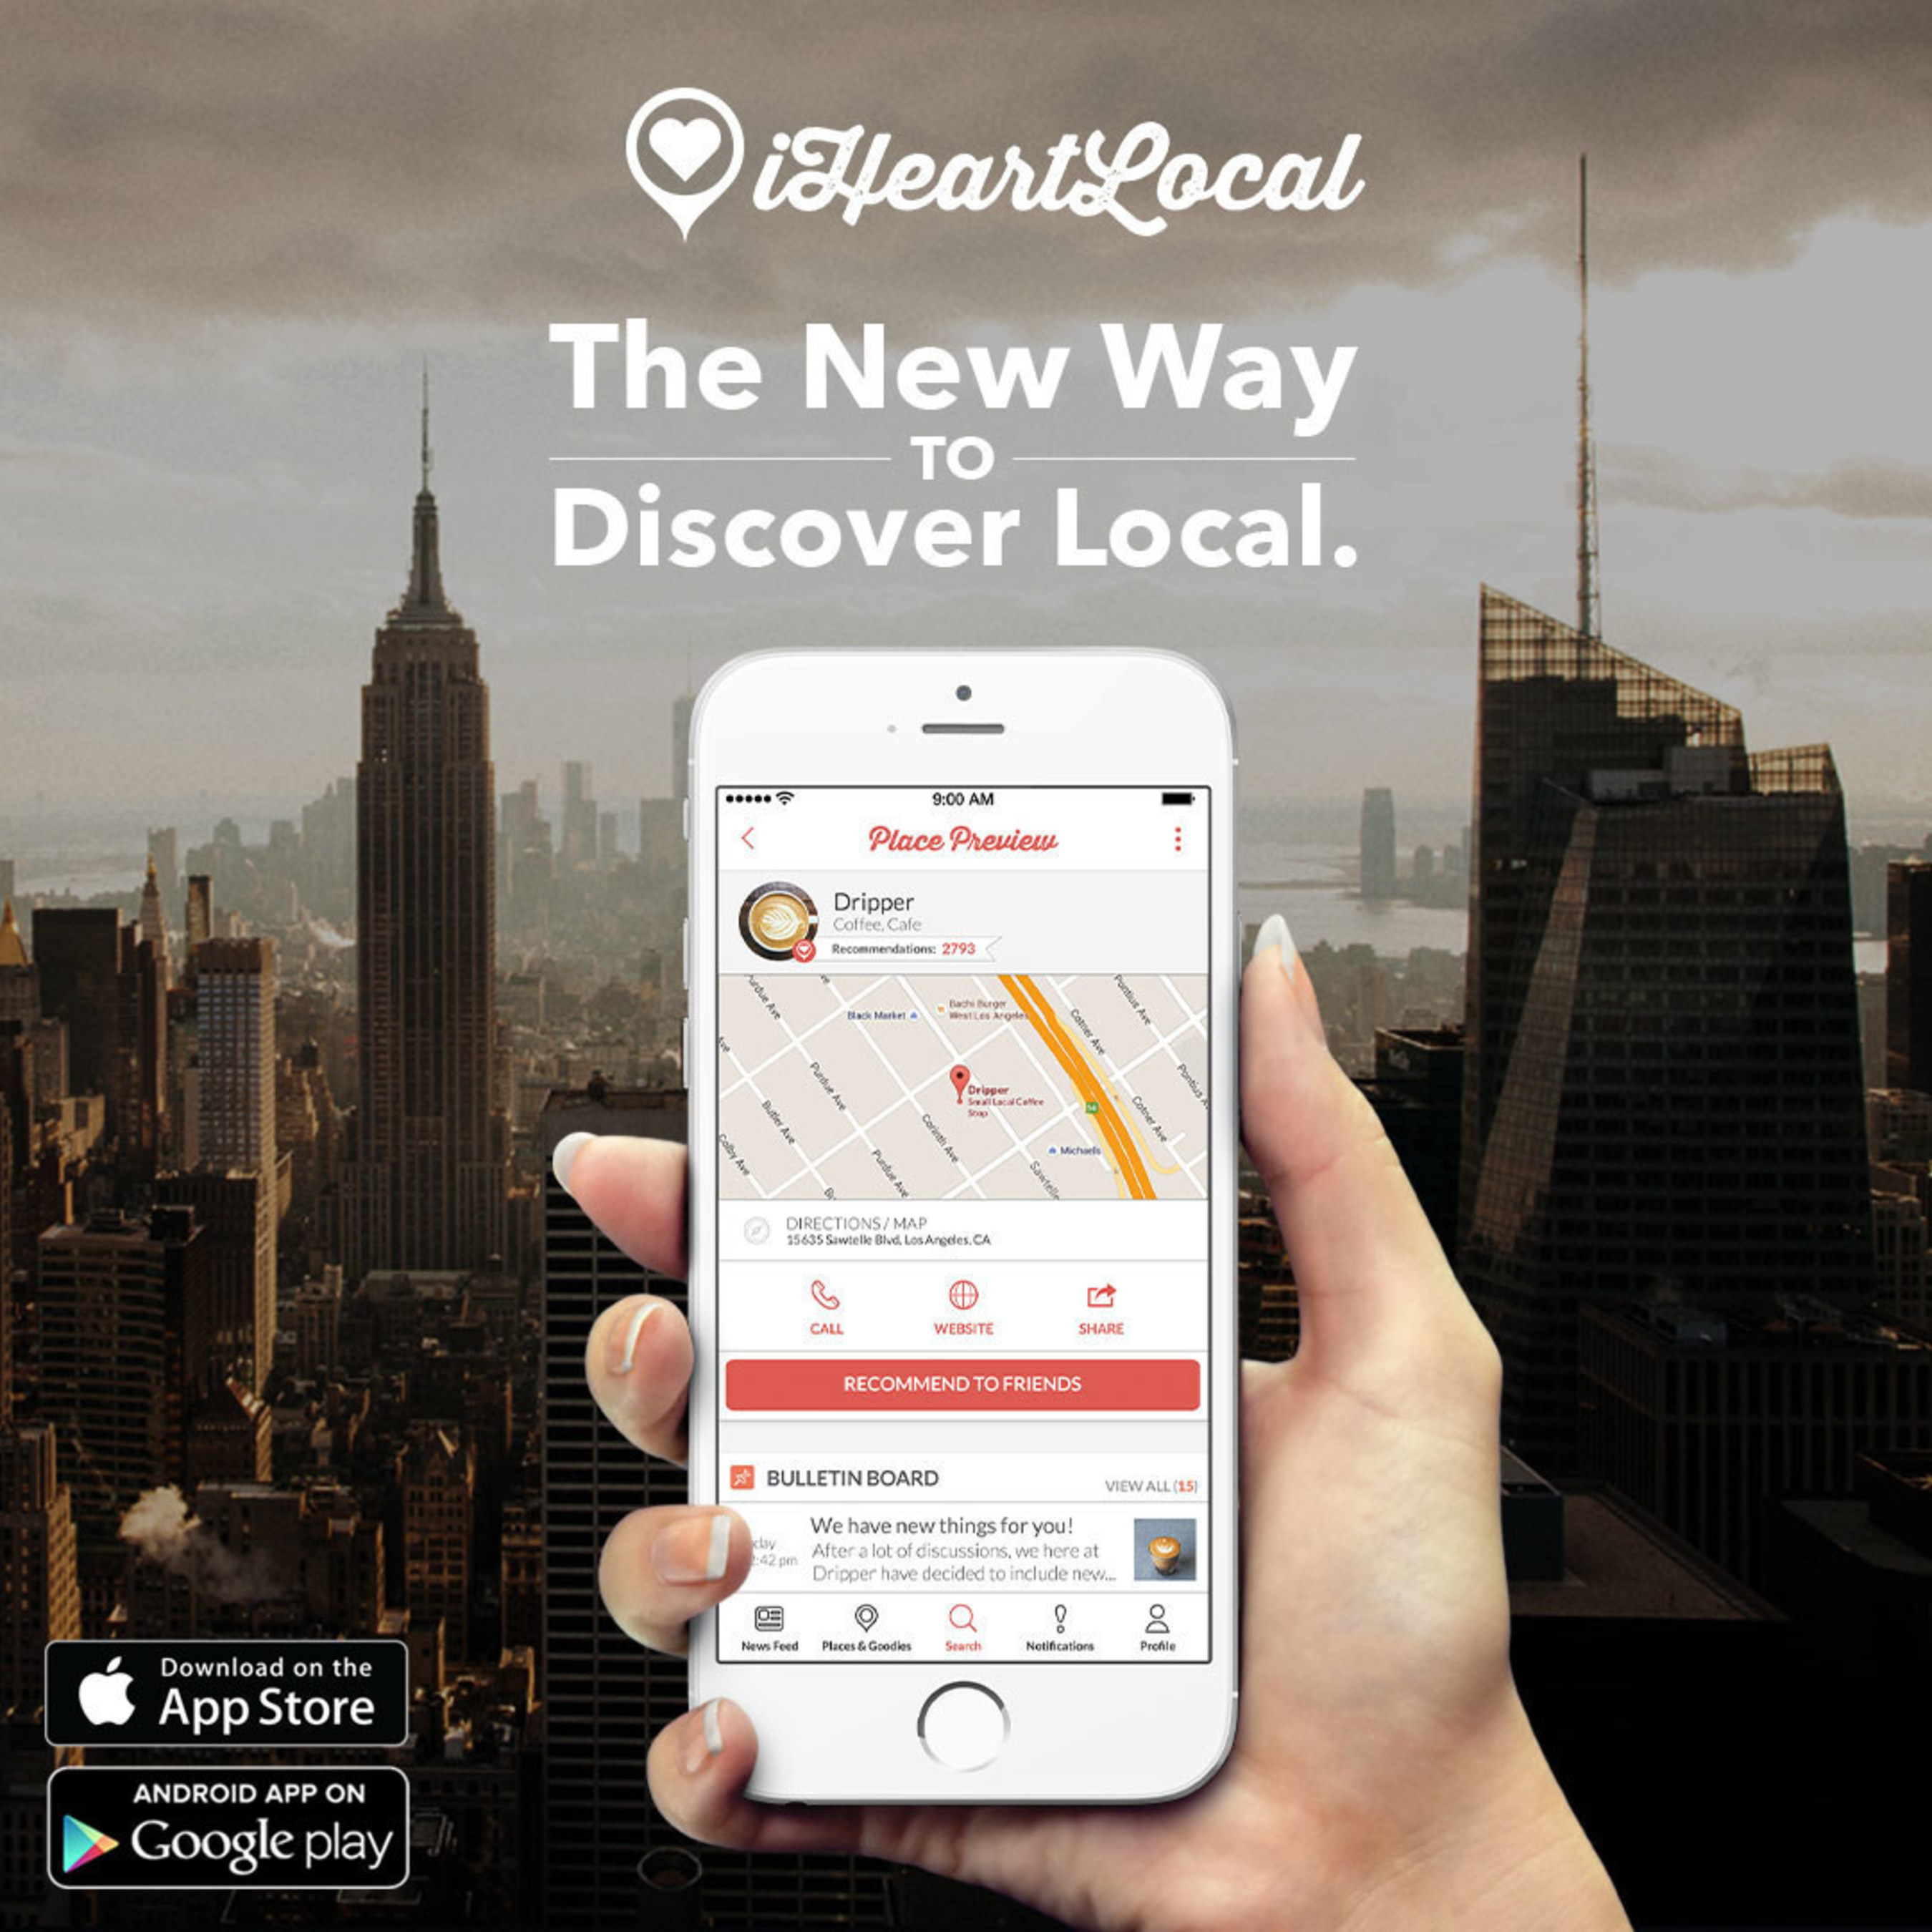 Introducing the New Way to Discover Local.